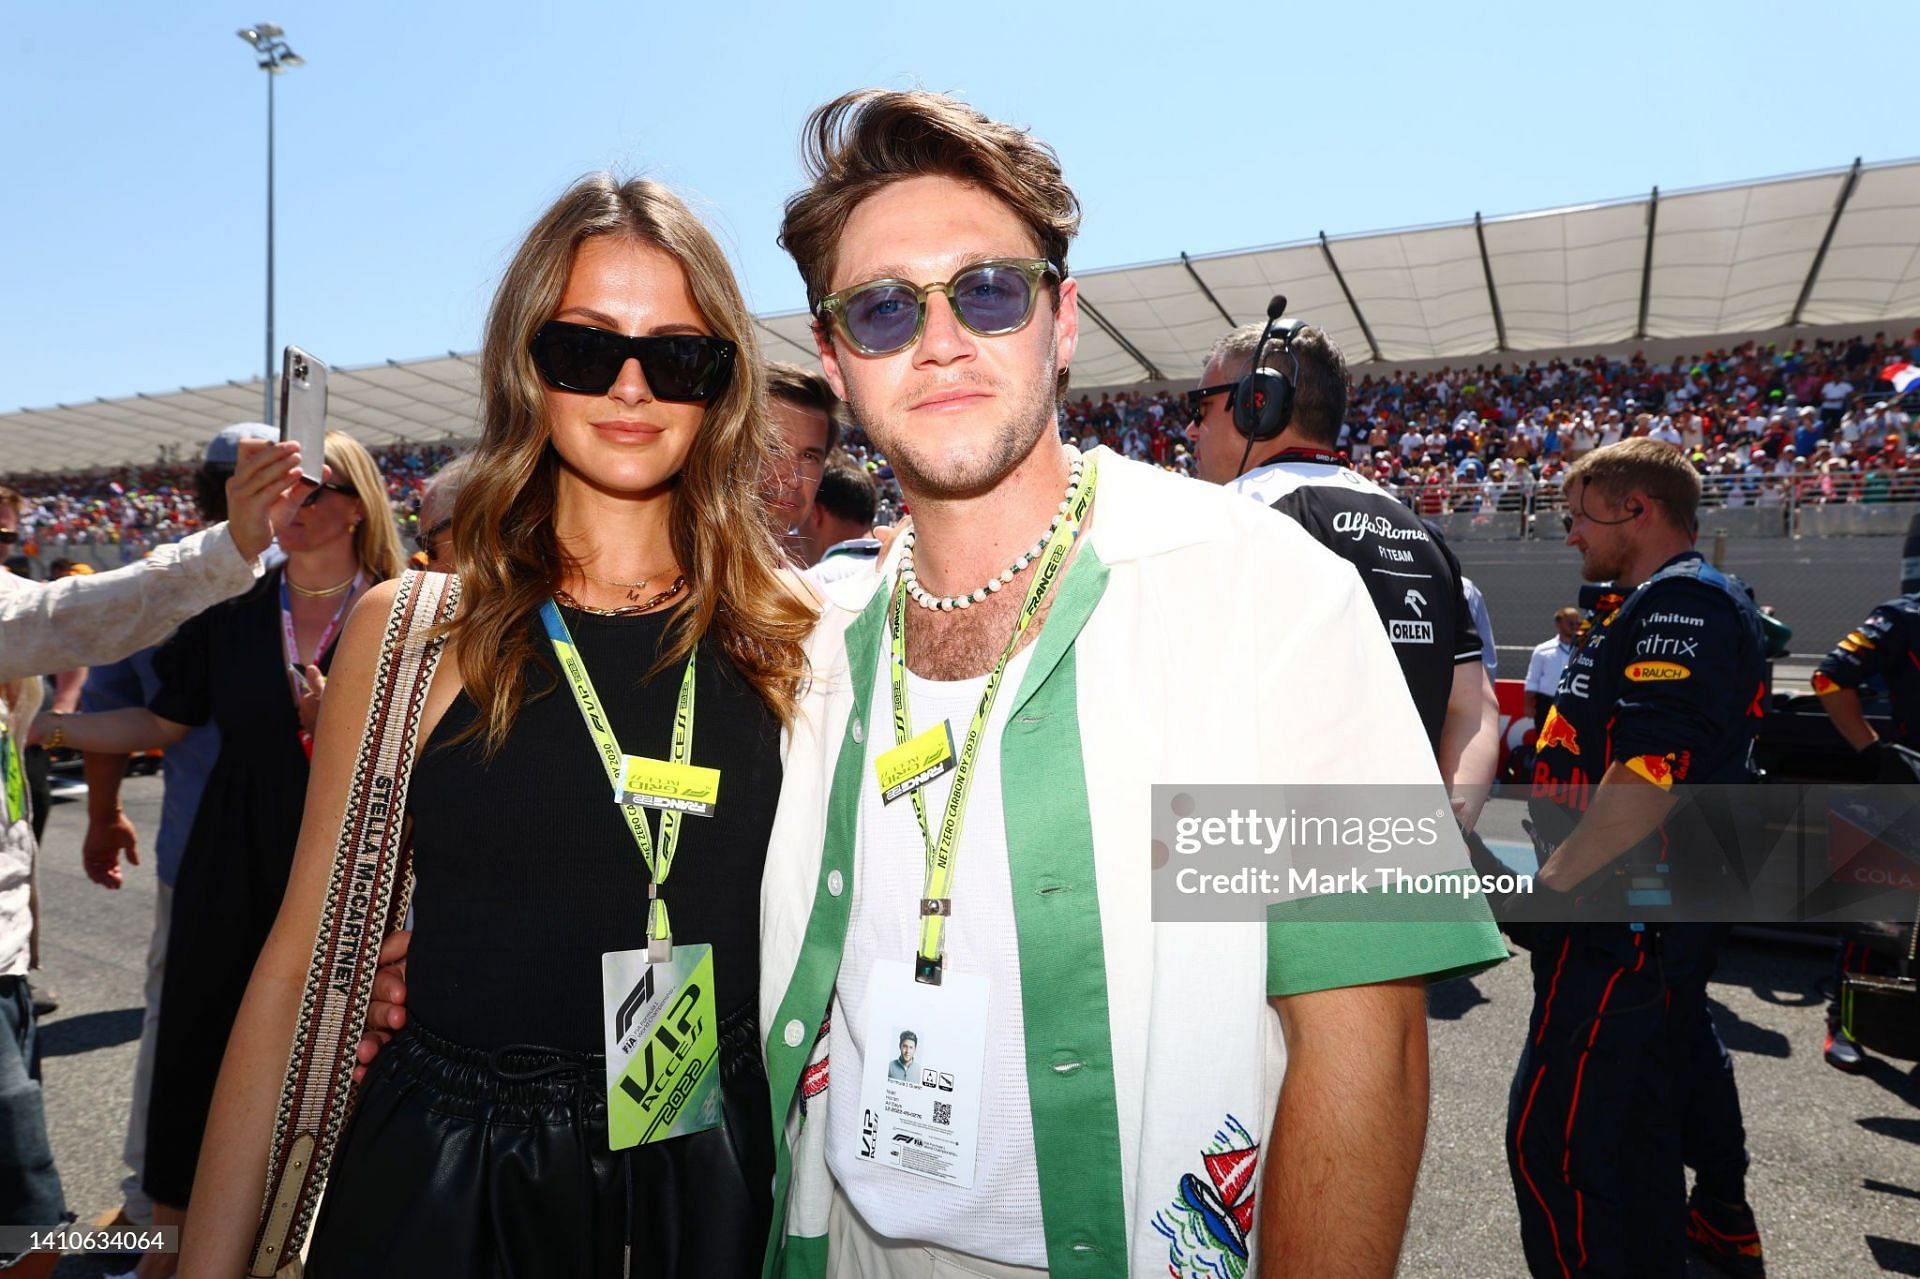 Amelia Woolley and Niall Horan (Image via Getty)